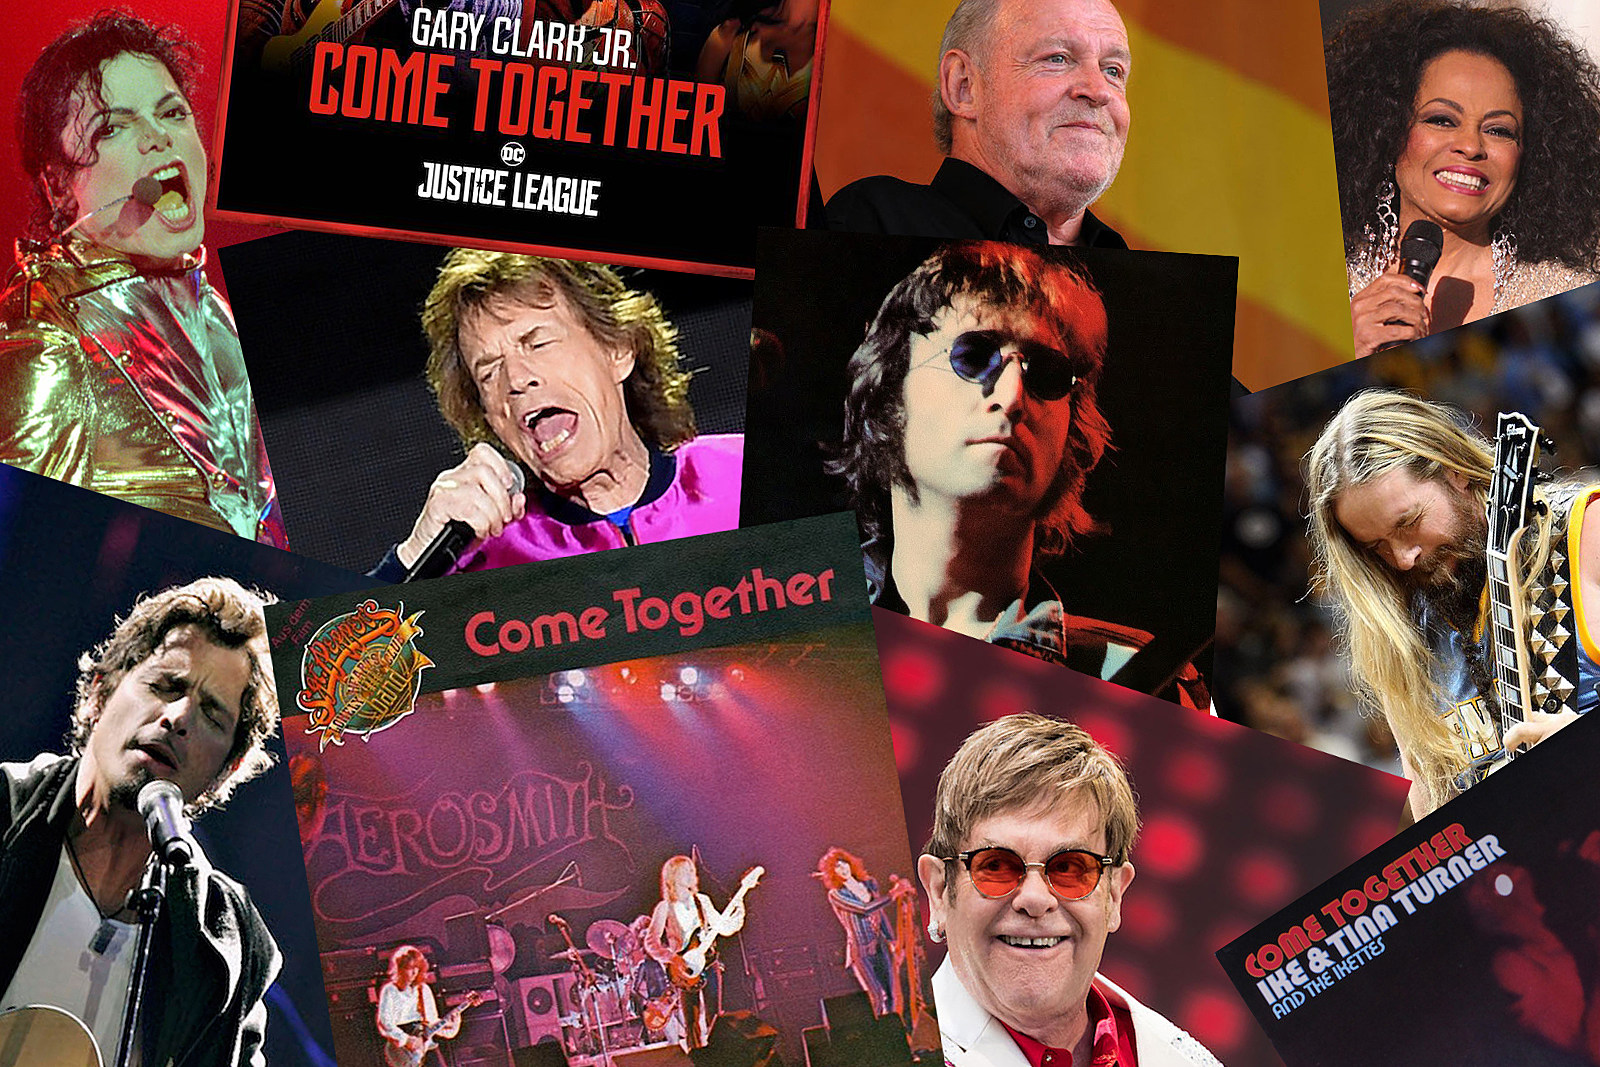 The History of the Beatles' 'Come Together' Covers